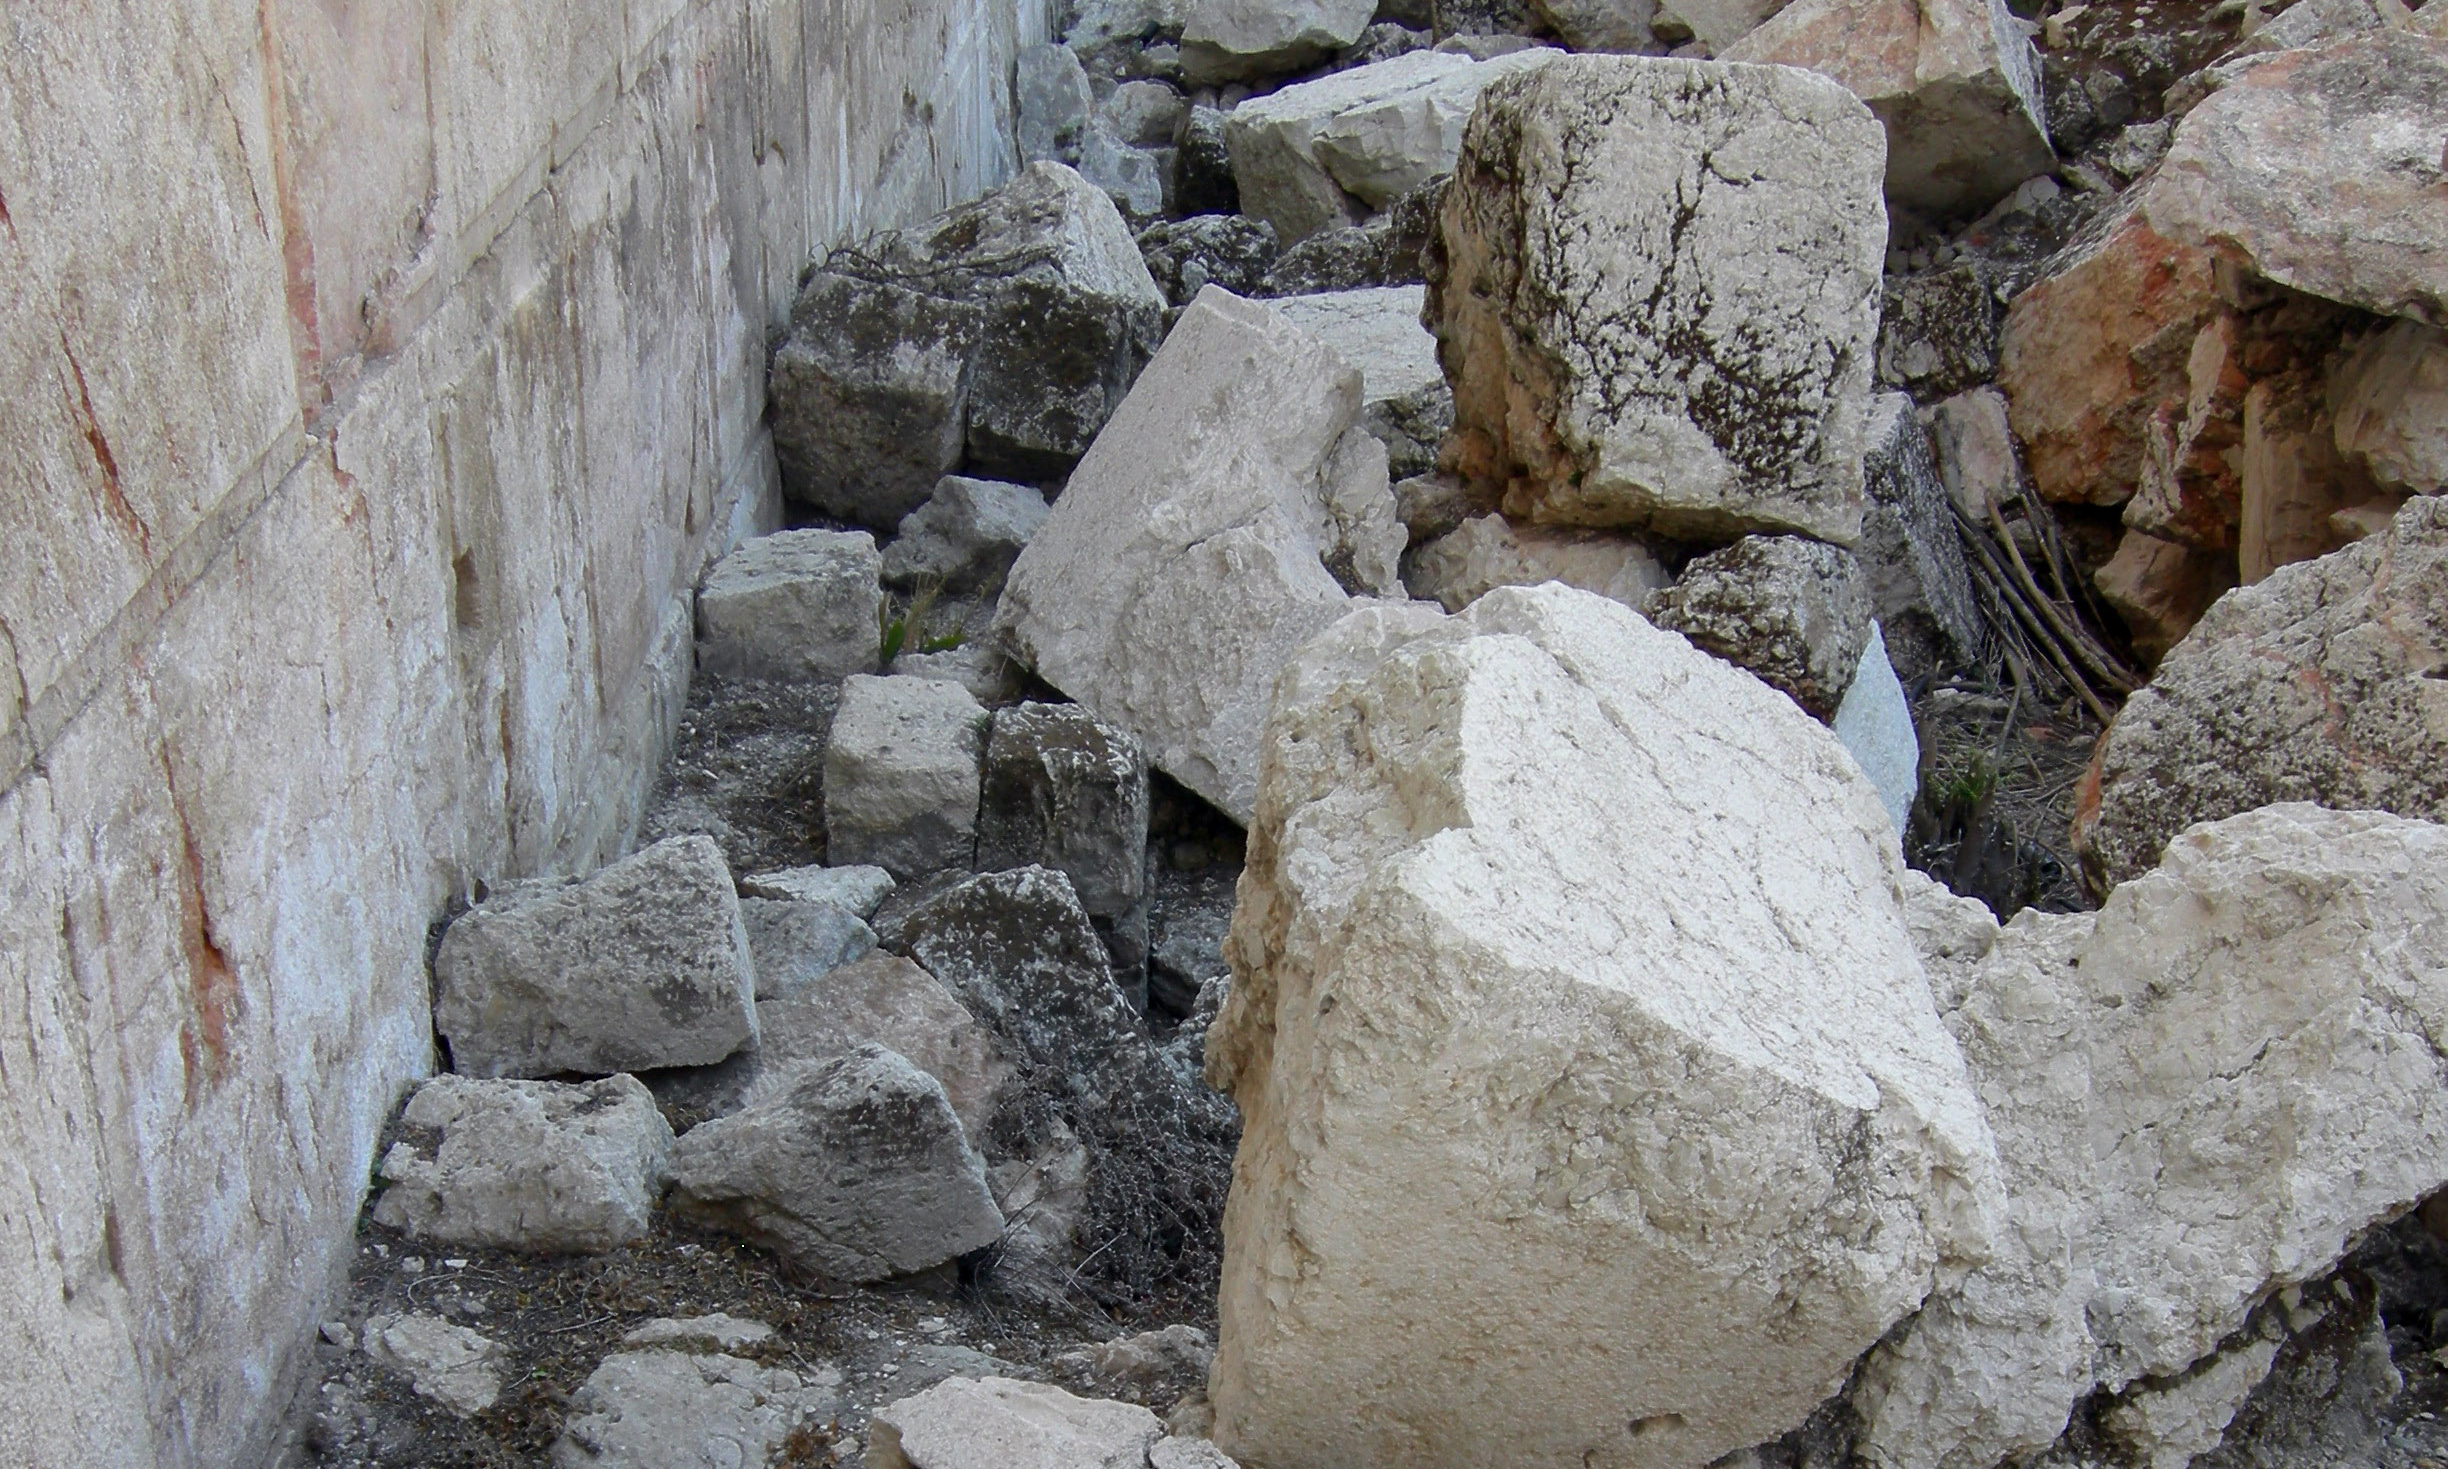 Excavated stones from the Wall of the 2nd Temple (Jerusalem)